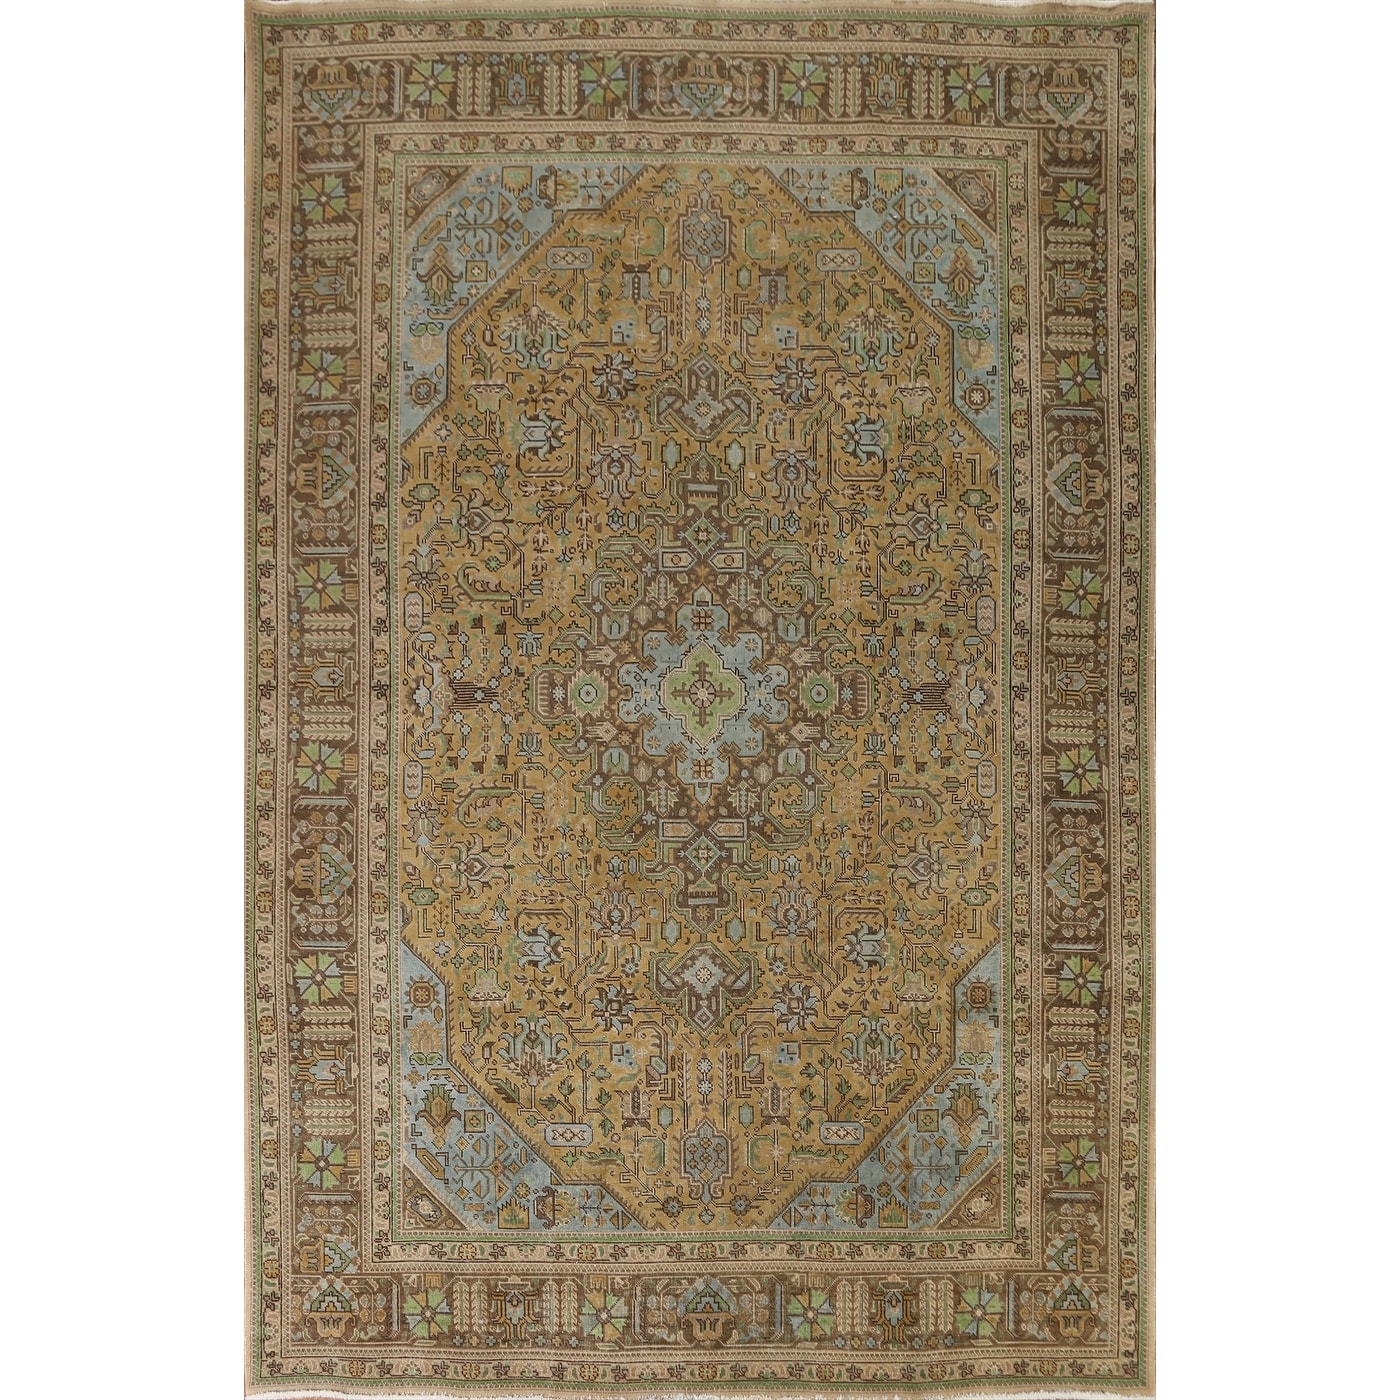 Vintage Over-Dyed Tabriz Persian Area Rug Hand-Knotted Wool Carpet - 7'10 x 10'10 - Gold/ Brown/ Light Blue